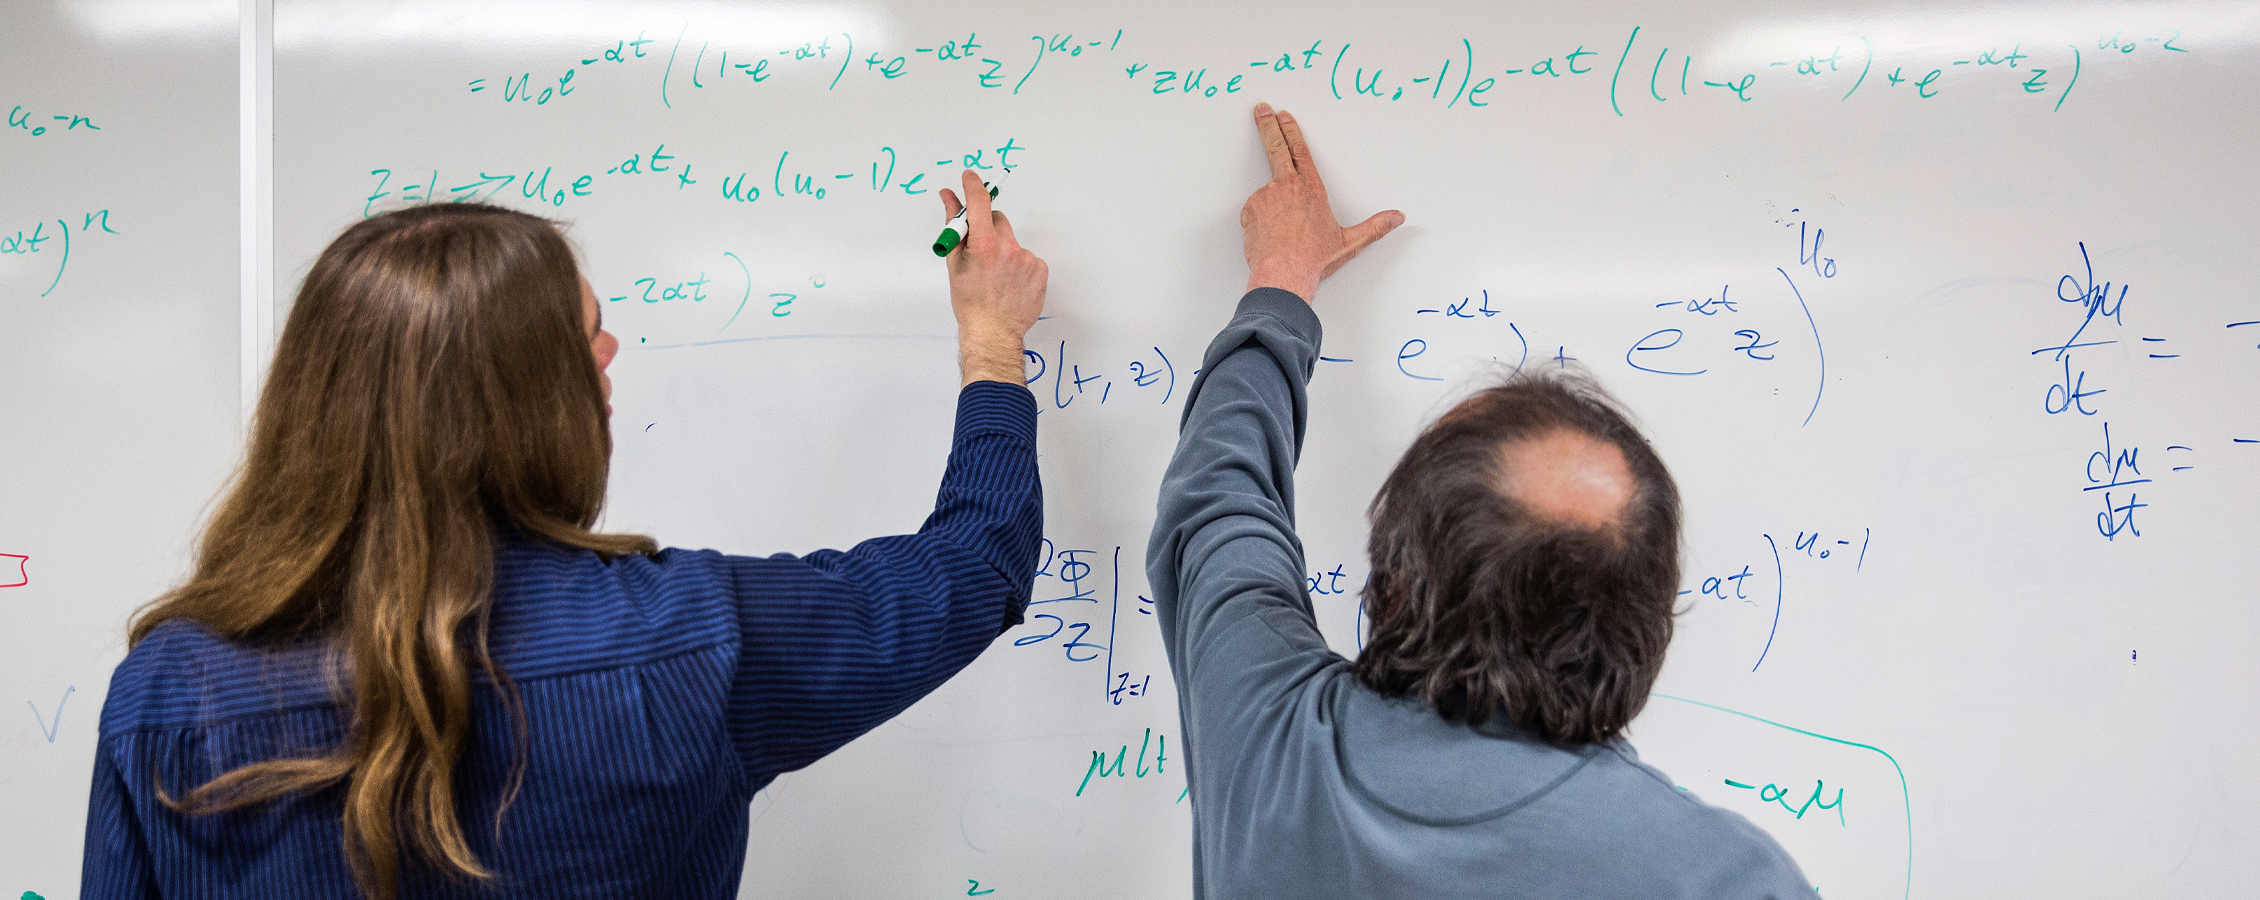 Mathematics student and instructor work on whiteboard